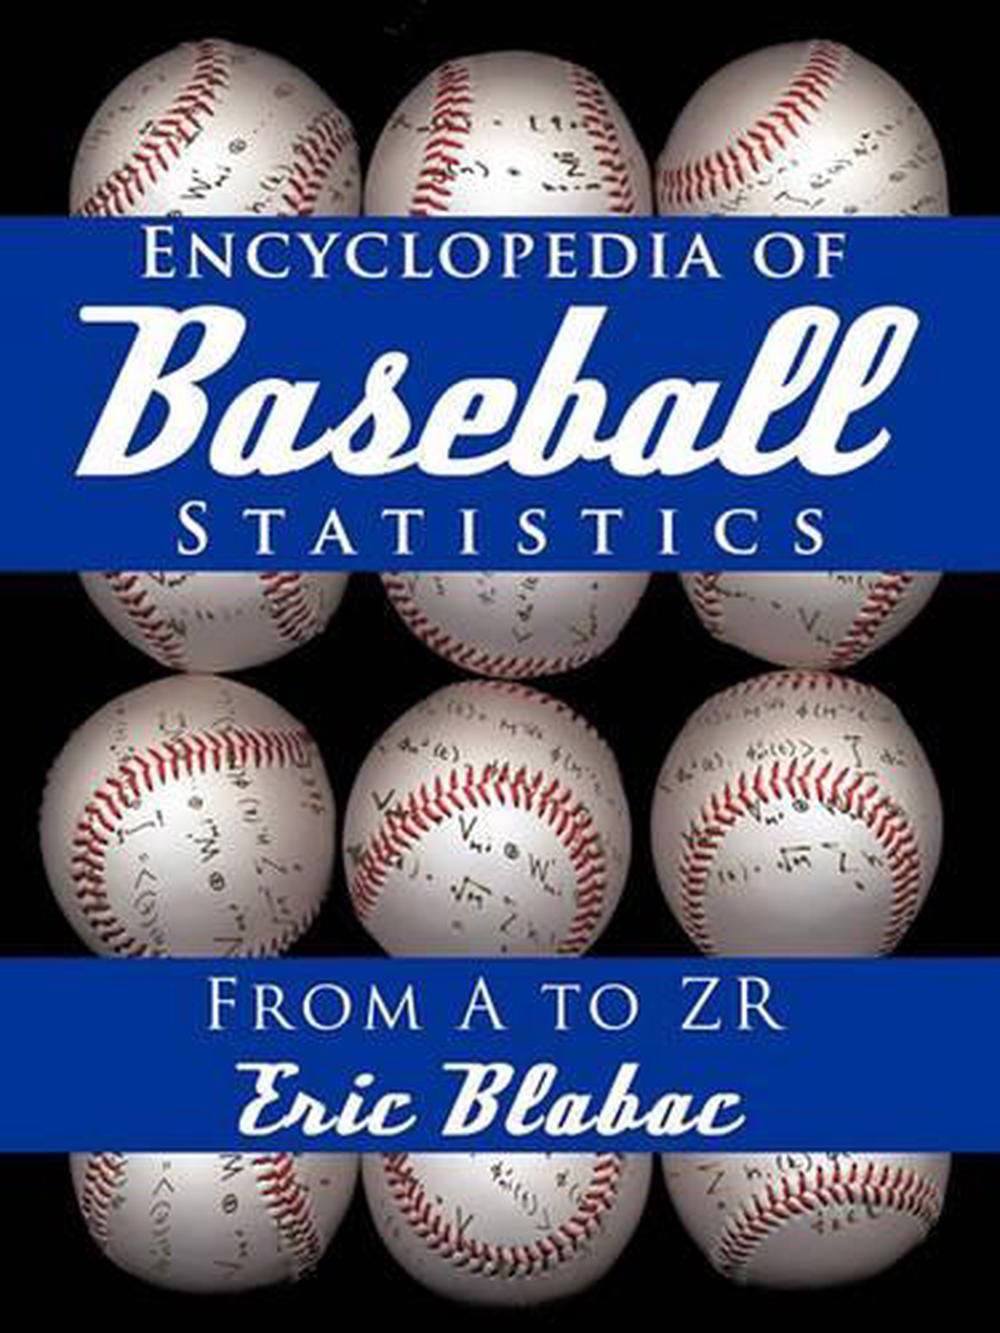 baseball statistics research papers